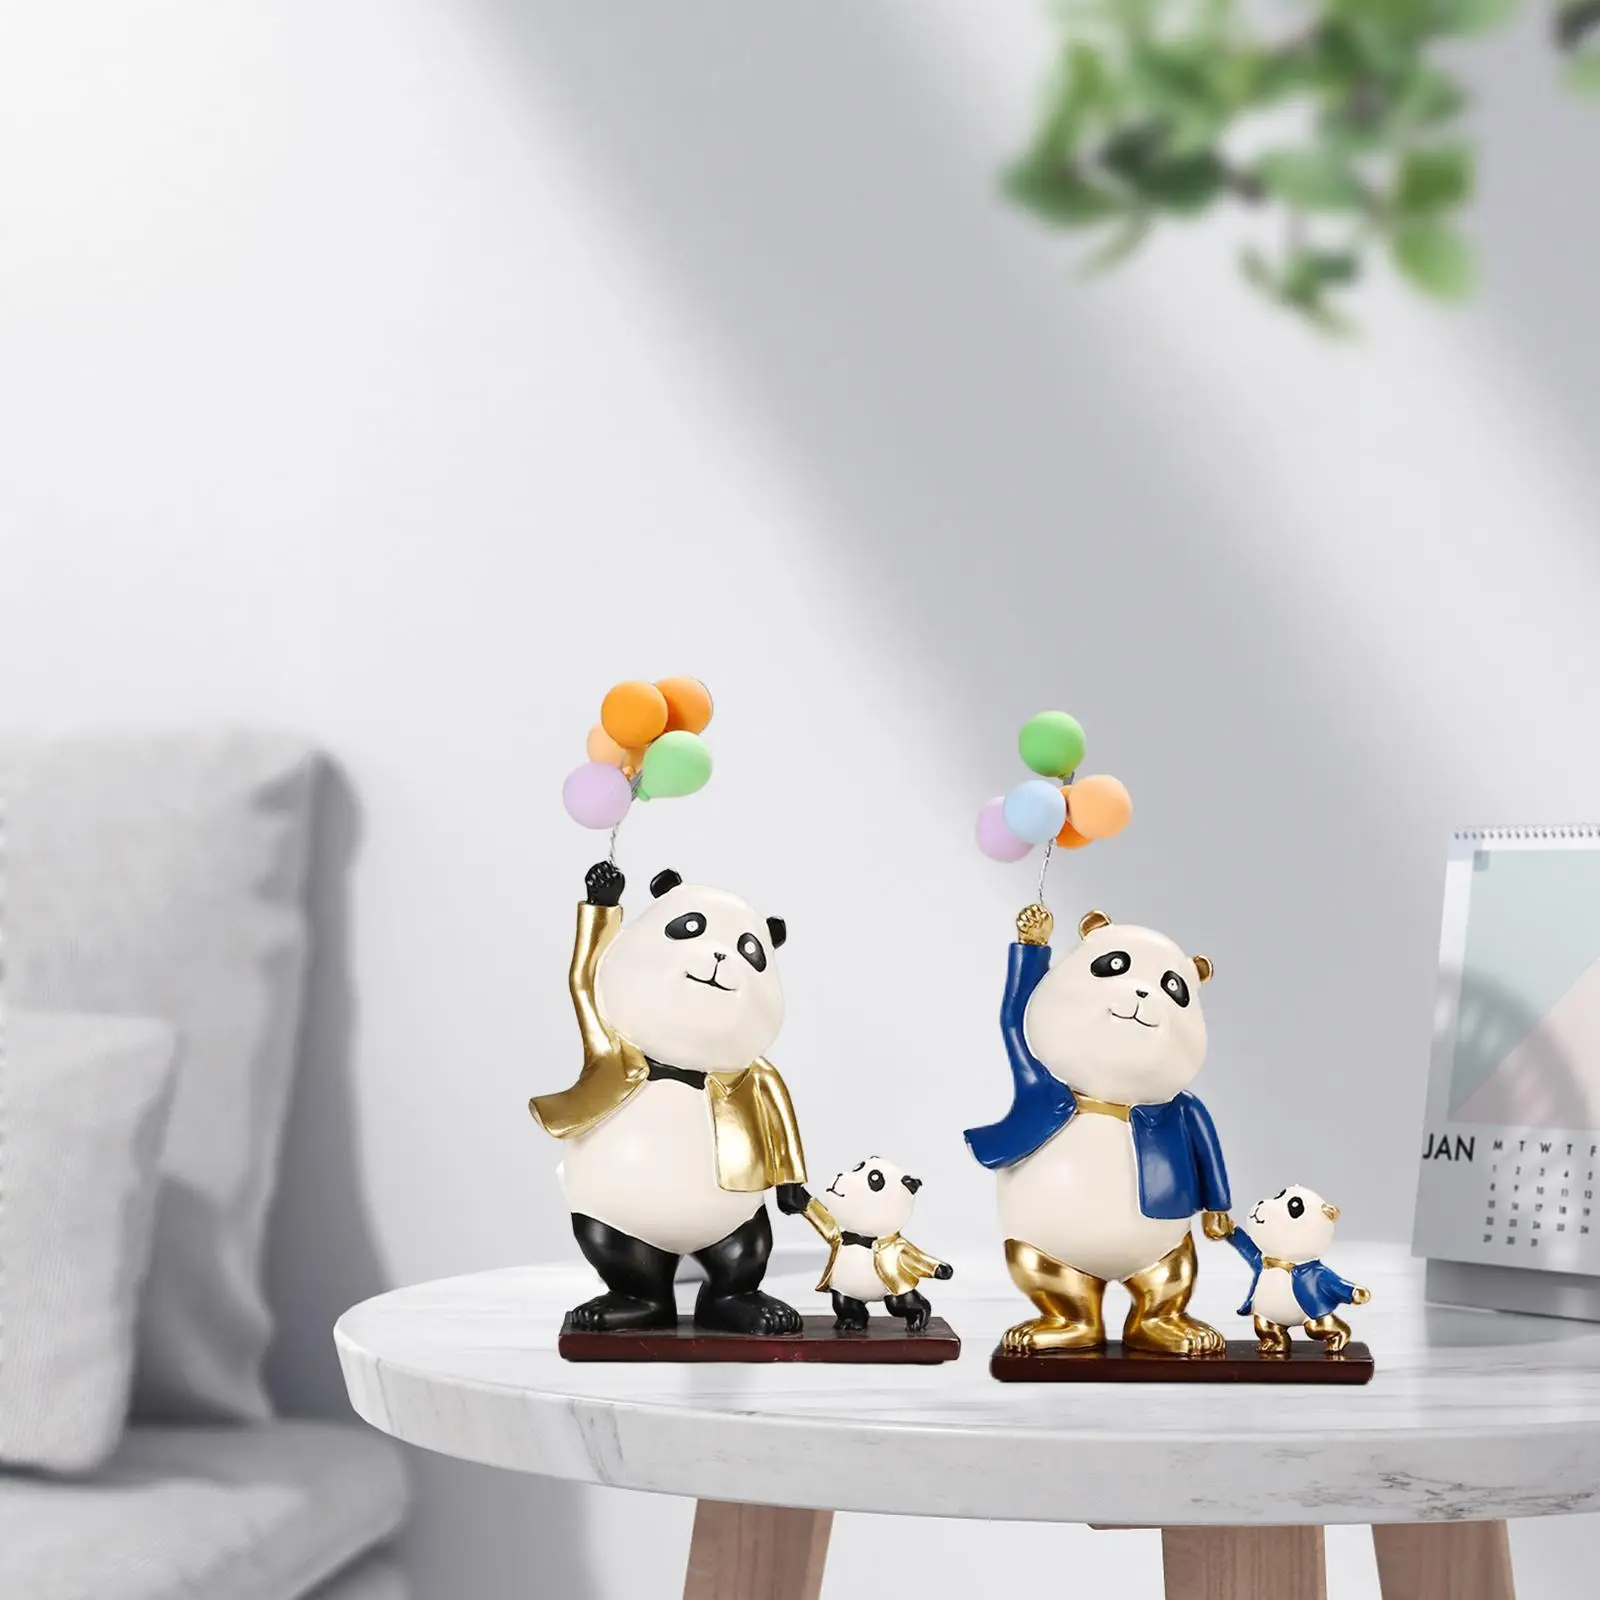 Panda Statue Figurine with Balloon Animal Sculpture for Tabletop Bookcase